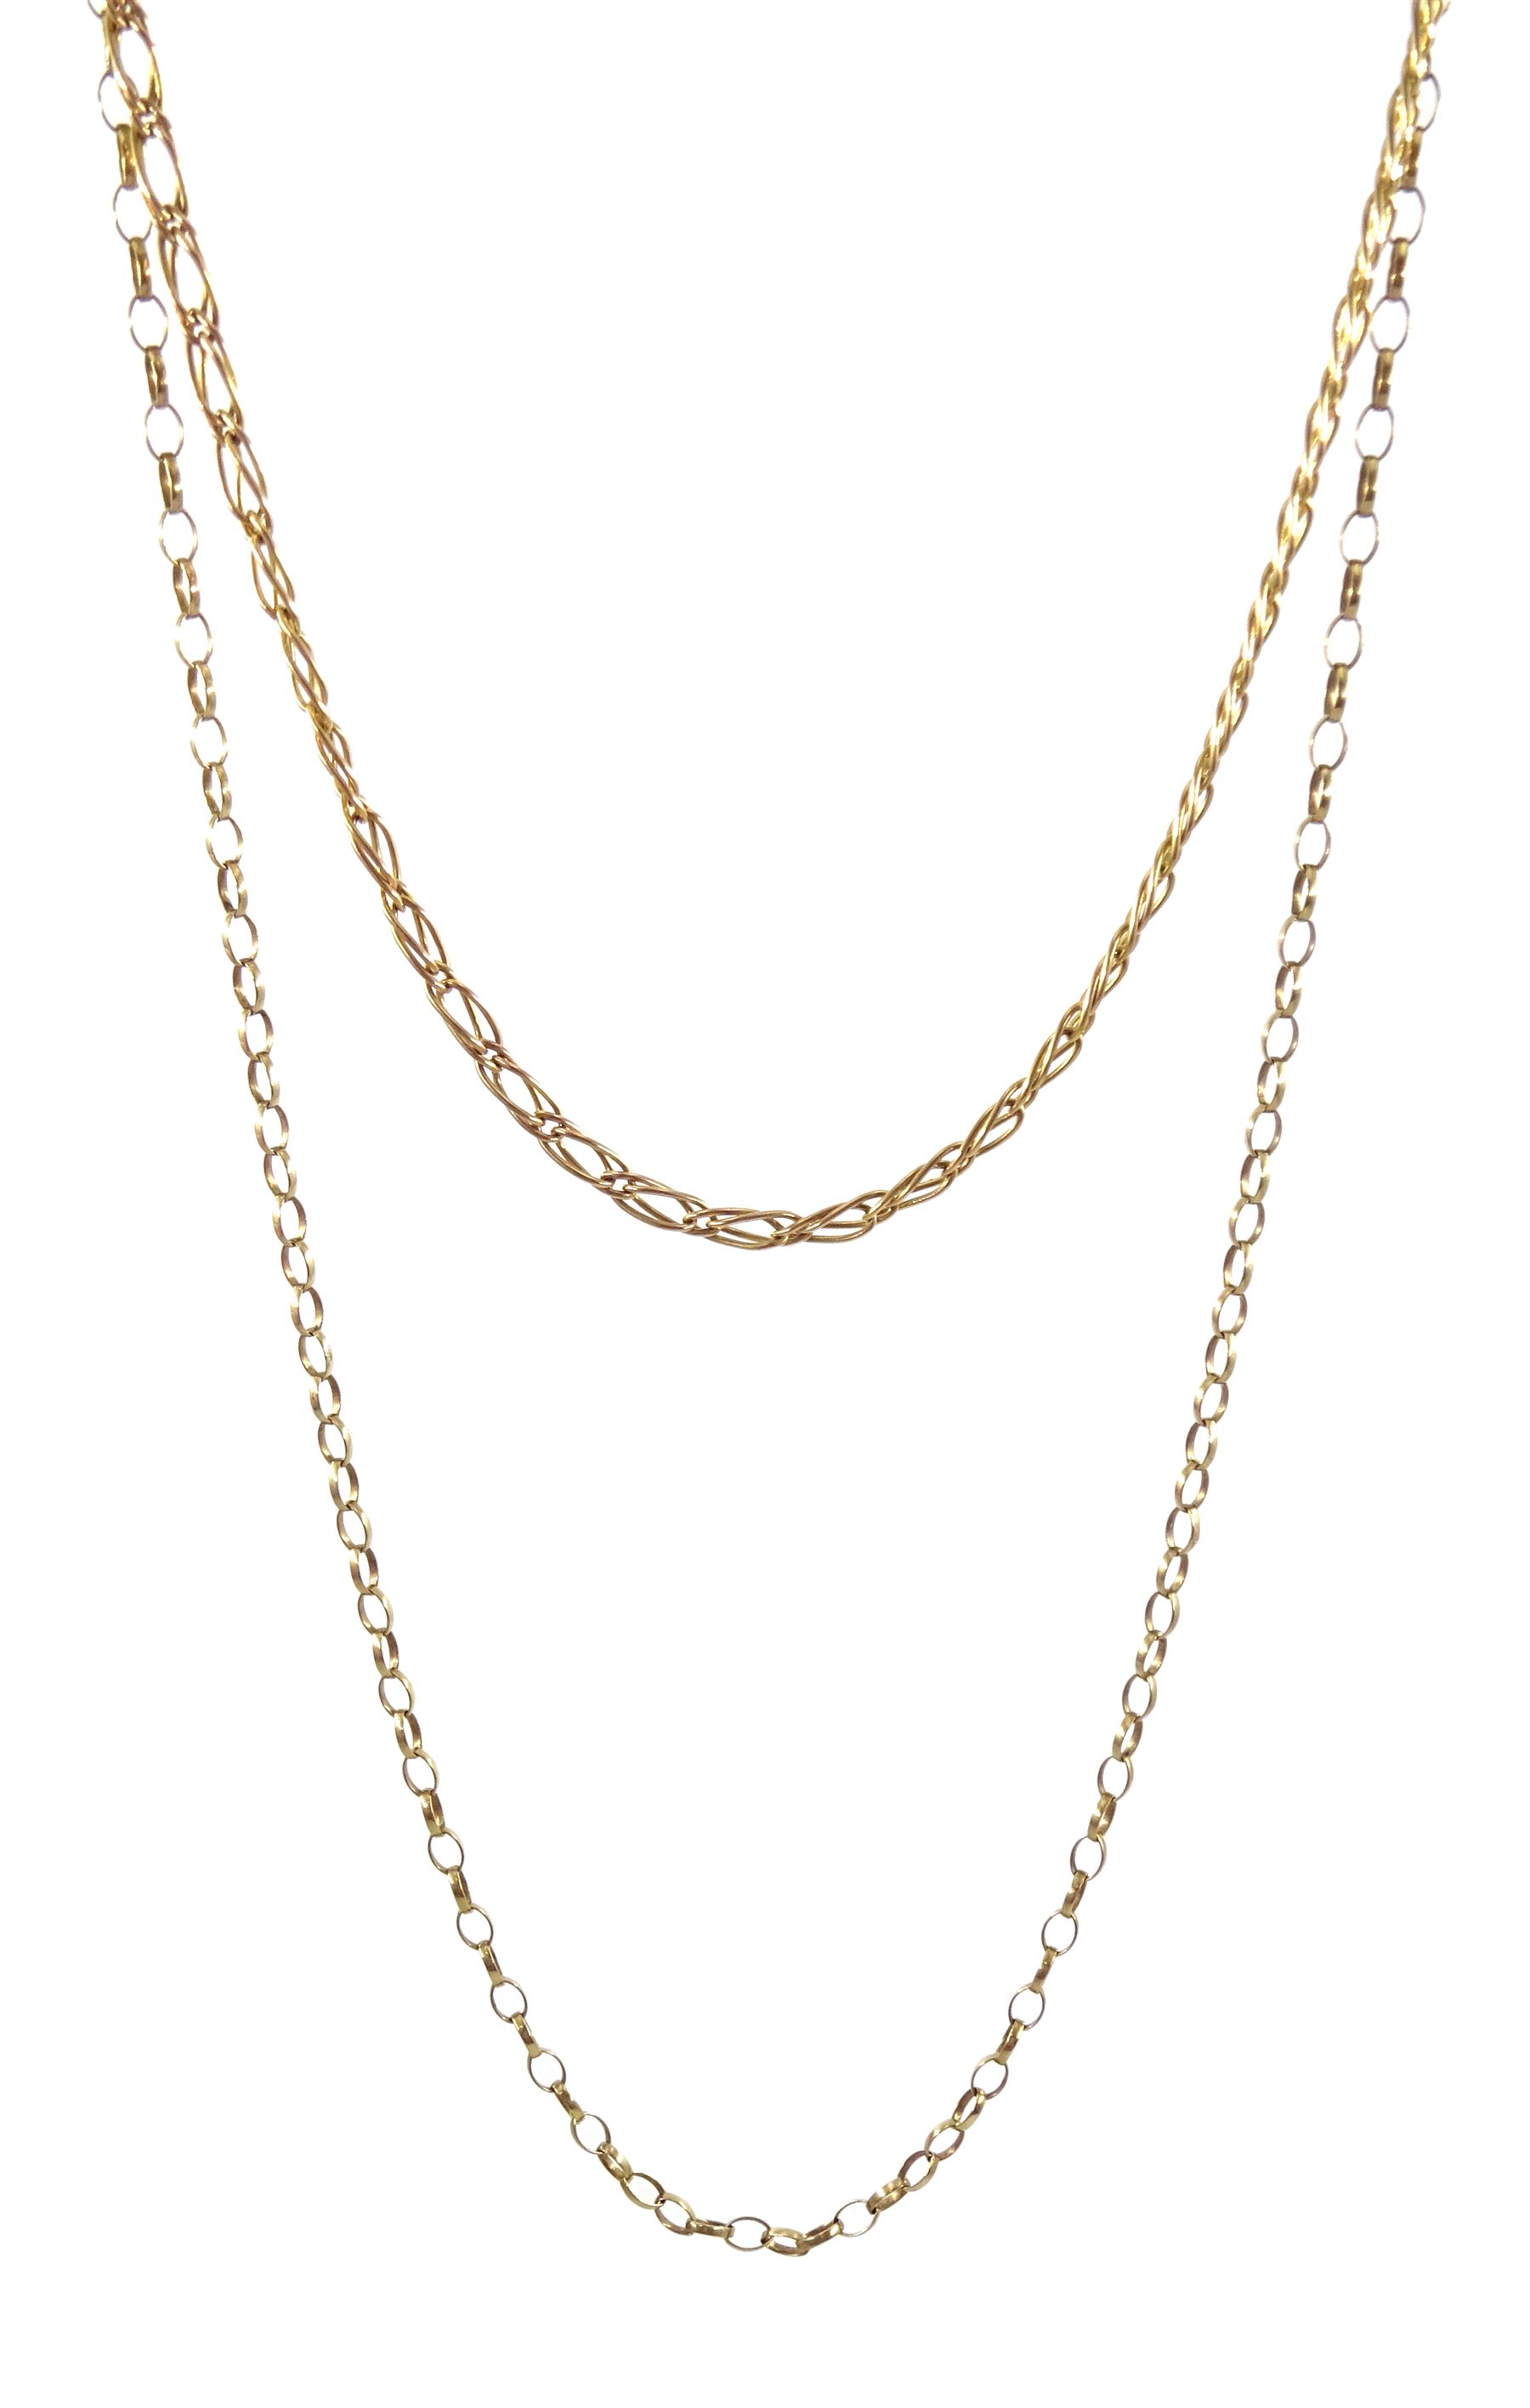 Two 9ct gold chain necklaces